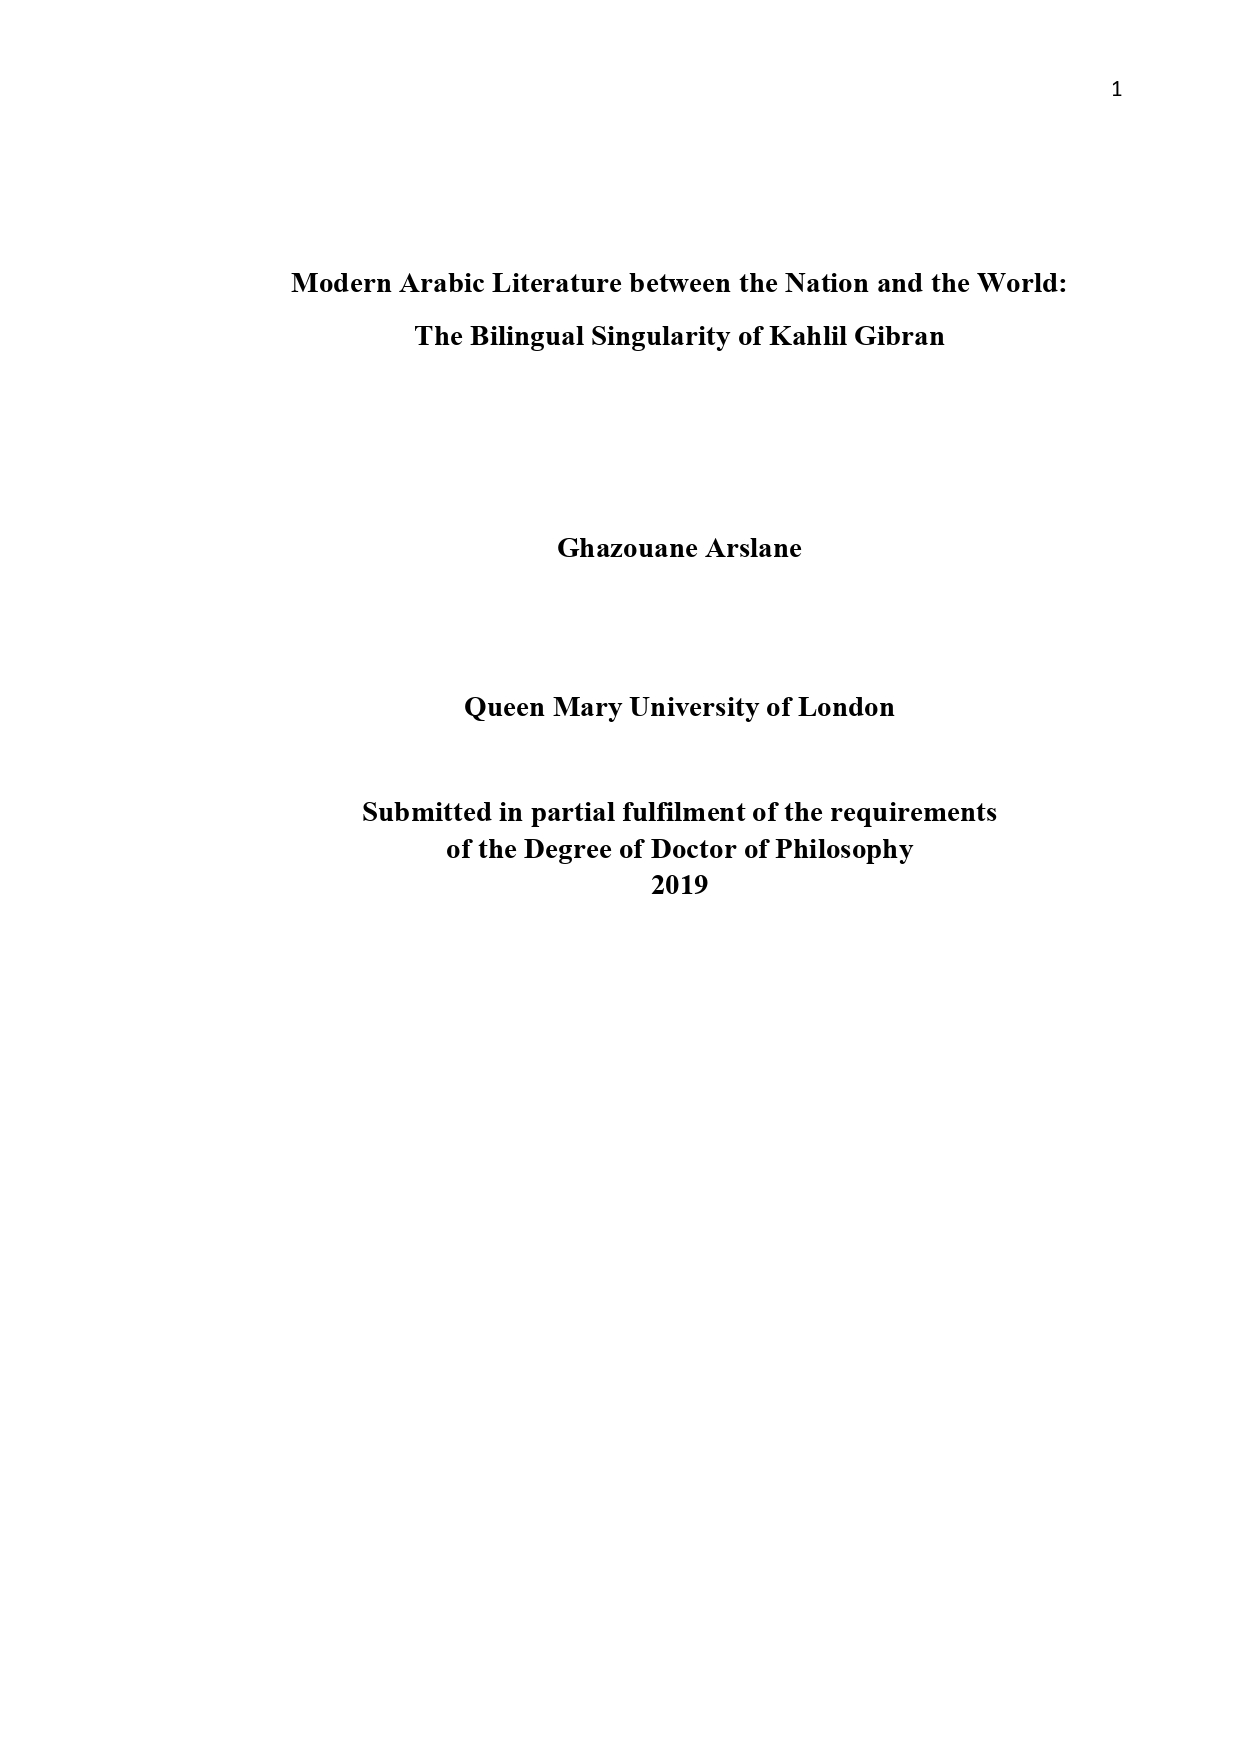 Ghazouane Arslane, "Modern Arabic Literature between the Nation and the World: The Bilingual Singularity of Kahlil Gibran", Queen Mary University of London, 2019.